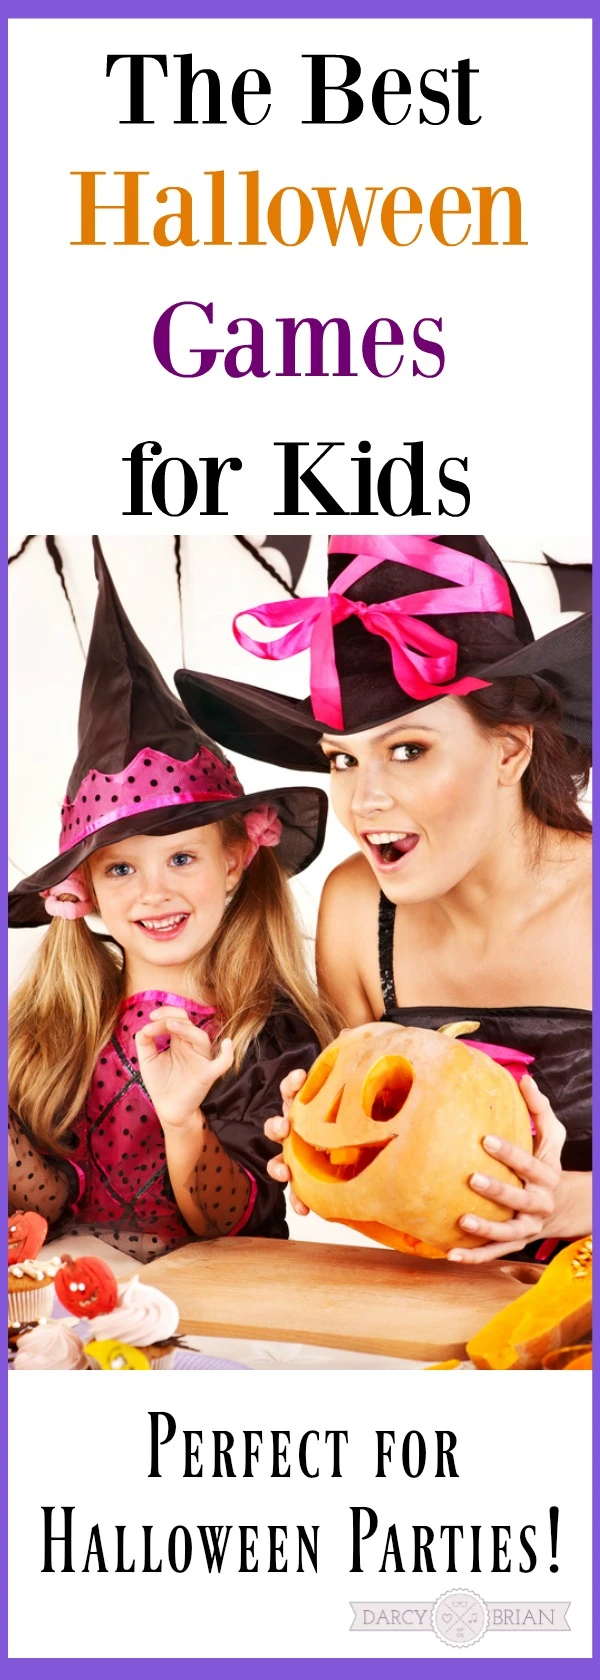 Love these ideas for kids activities! Planning a Halloween party for kids? Check out the BEST Halloween Games for Kids! This list has some easy to create games that are budget-friendly and tons of fun for Halloween parties!